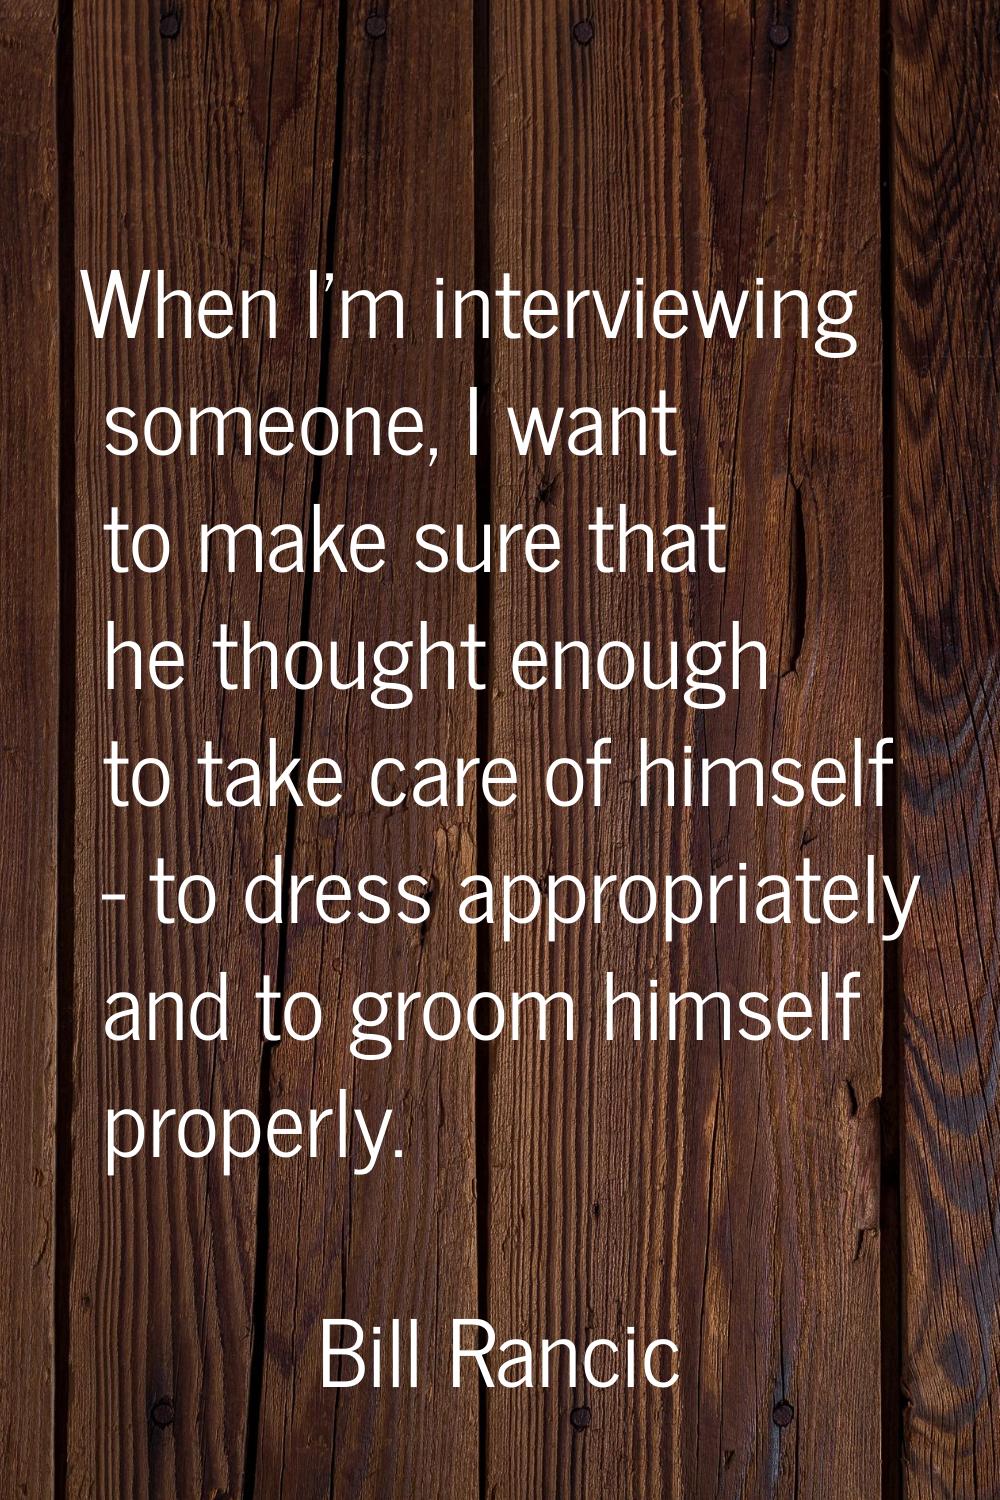 When I'm interviewing someone, I want to make sure that he thought enough to take care of himself -